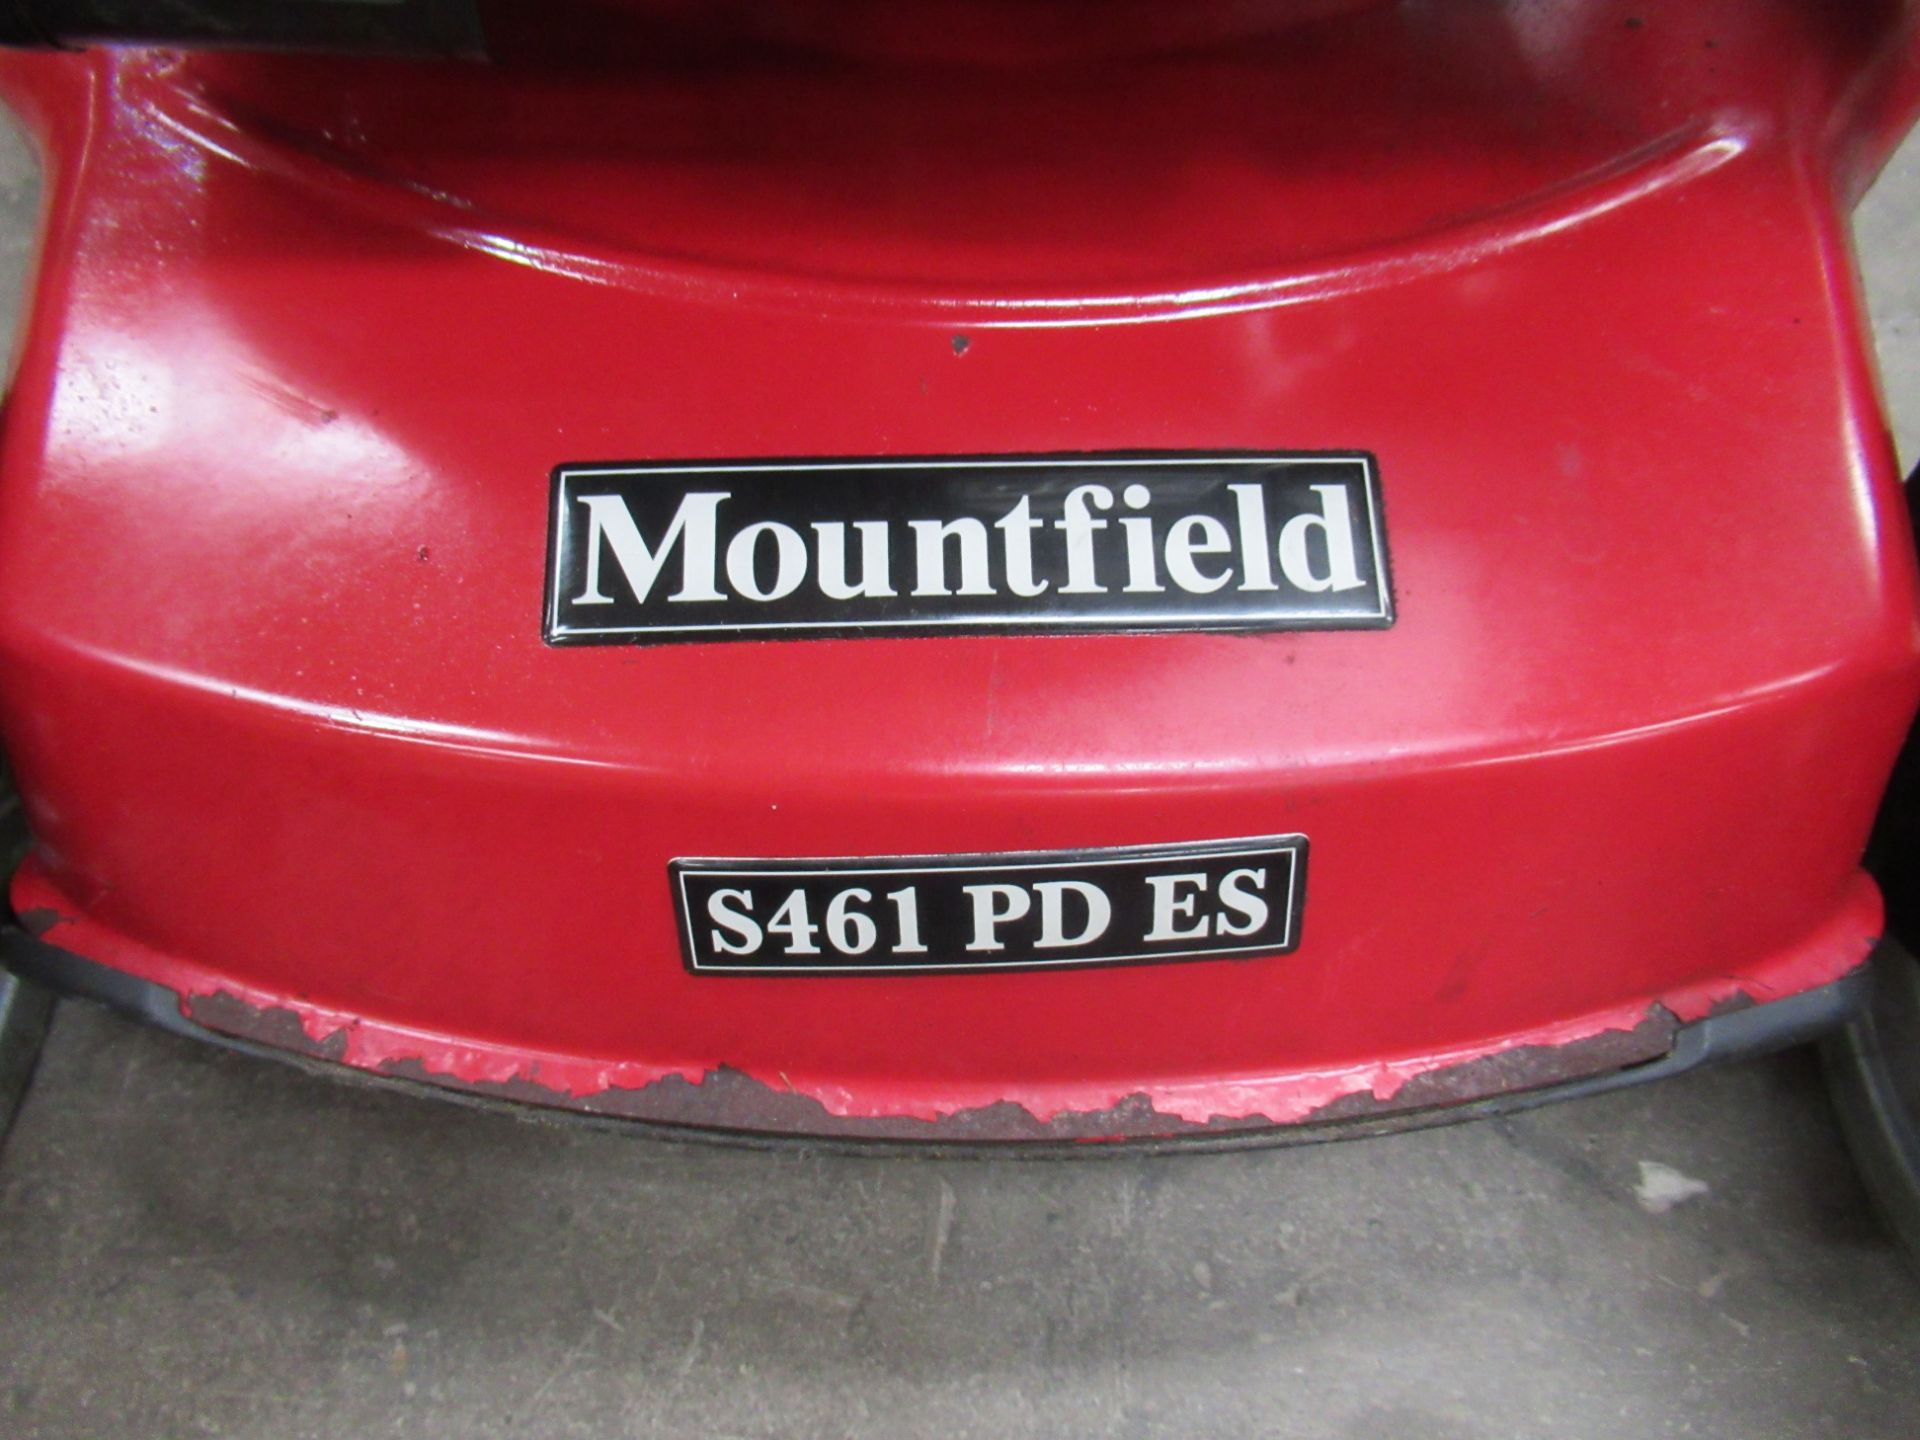 Mountfield Rotary S461PDES Self-Proppelled Lawnmower - Image 6 of 6